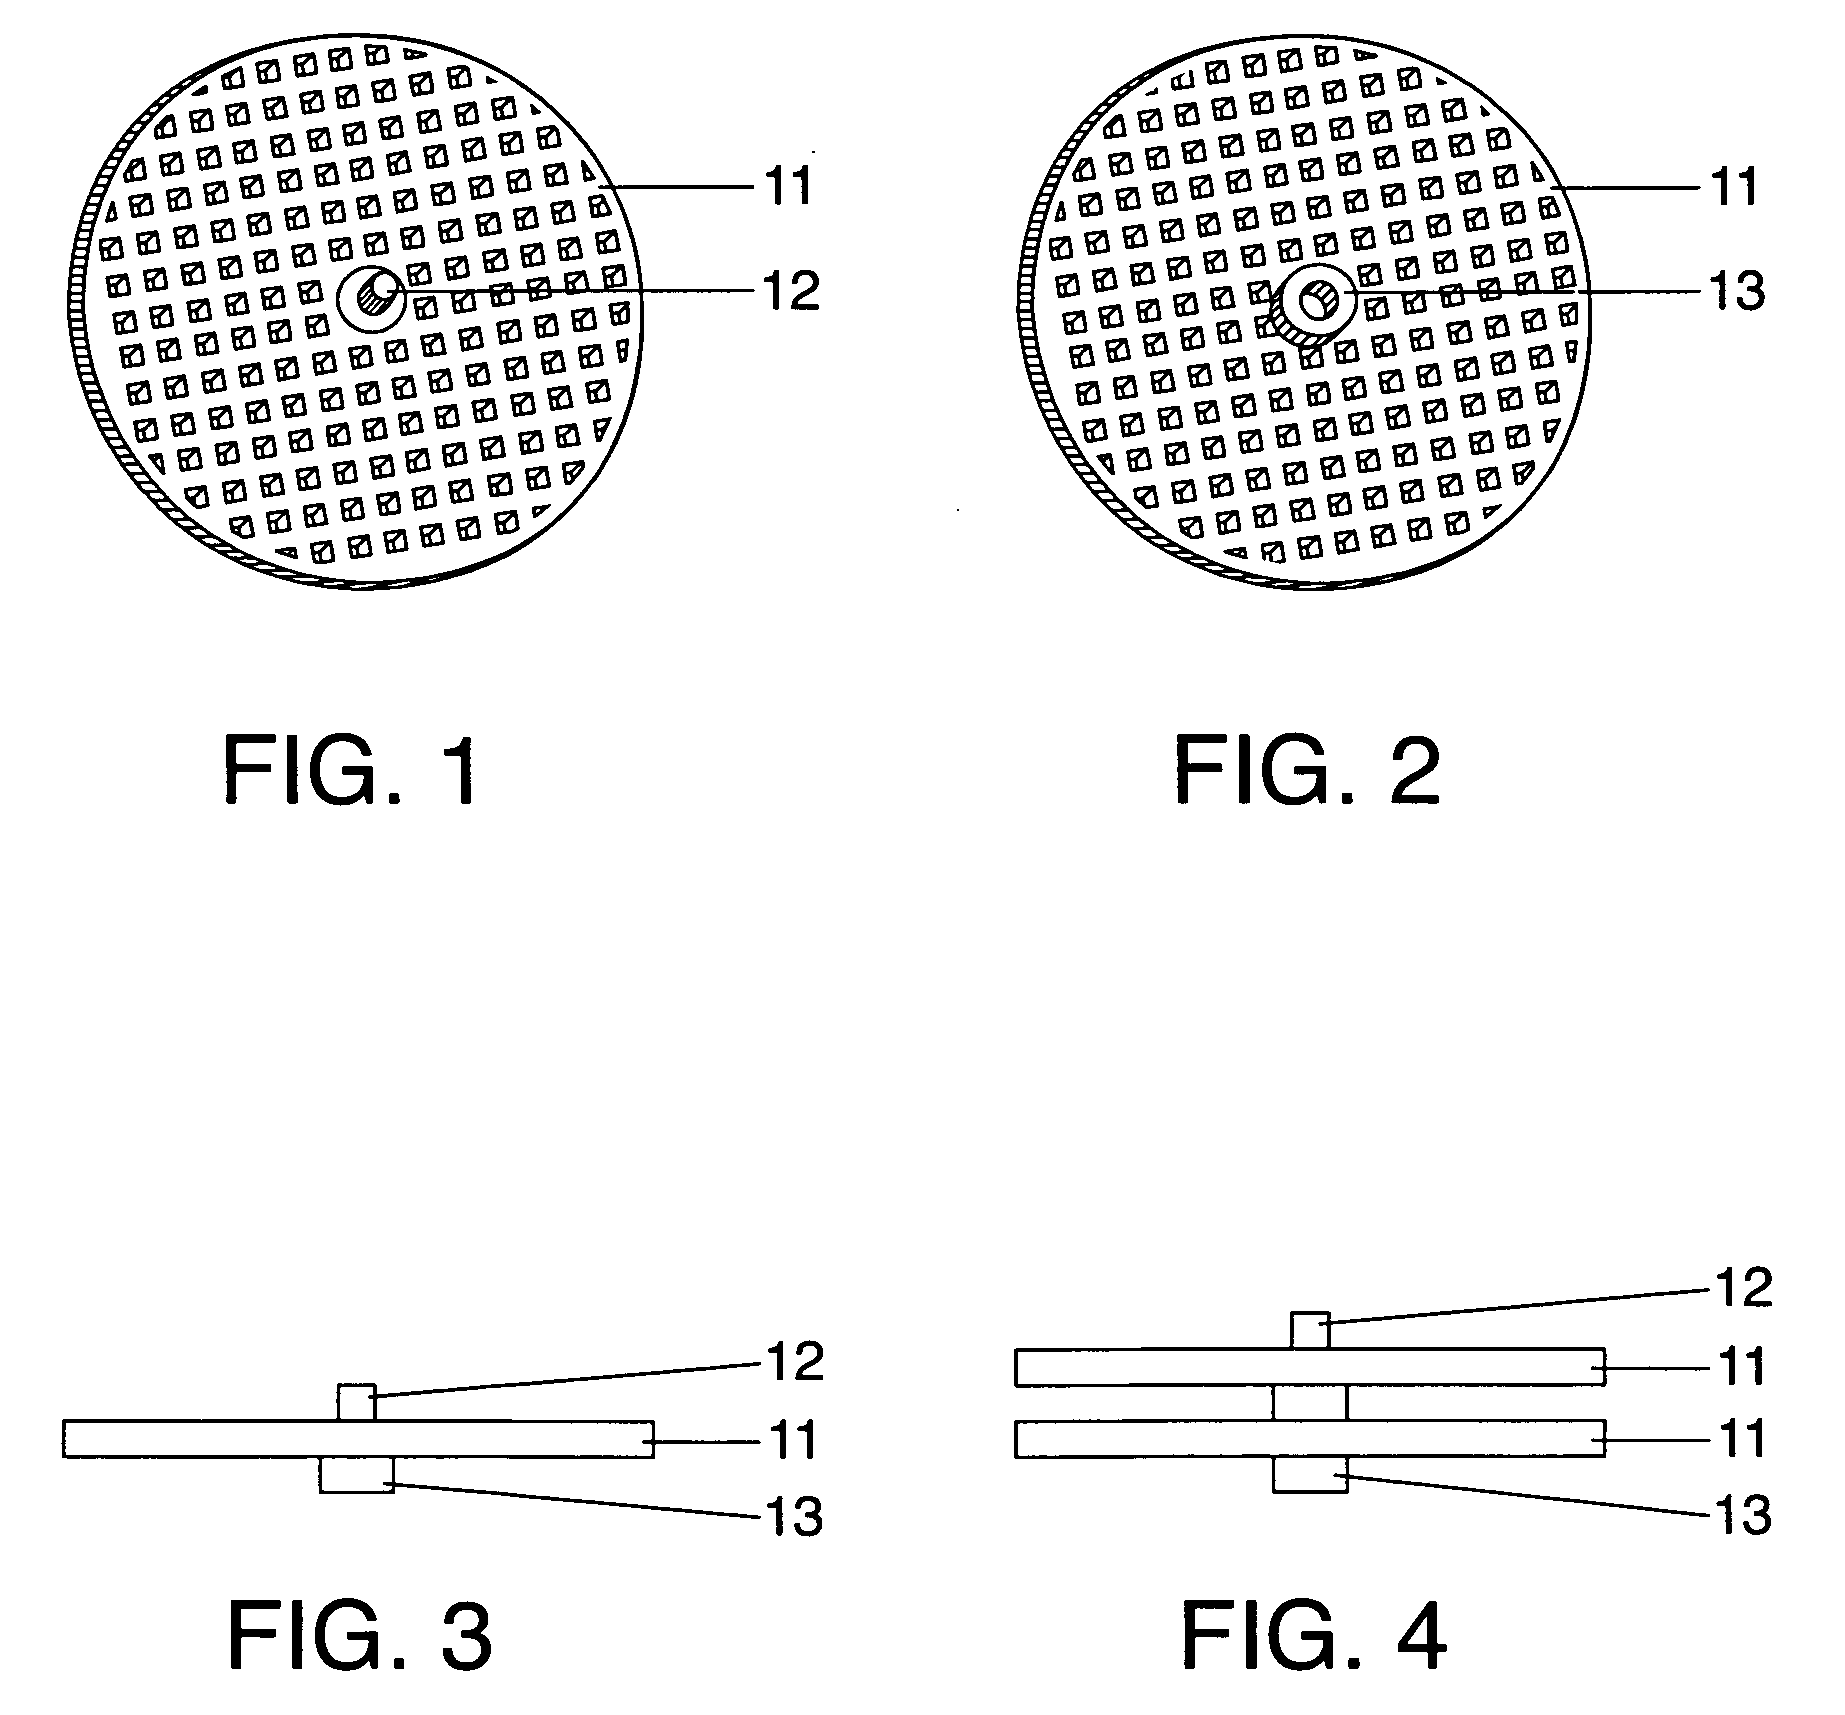 Human urine scent cover, elimination and neutralization of human urine scent kits and methods